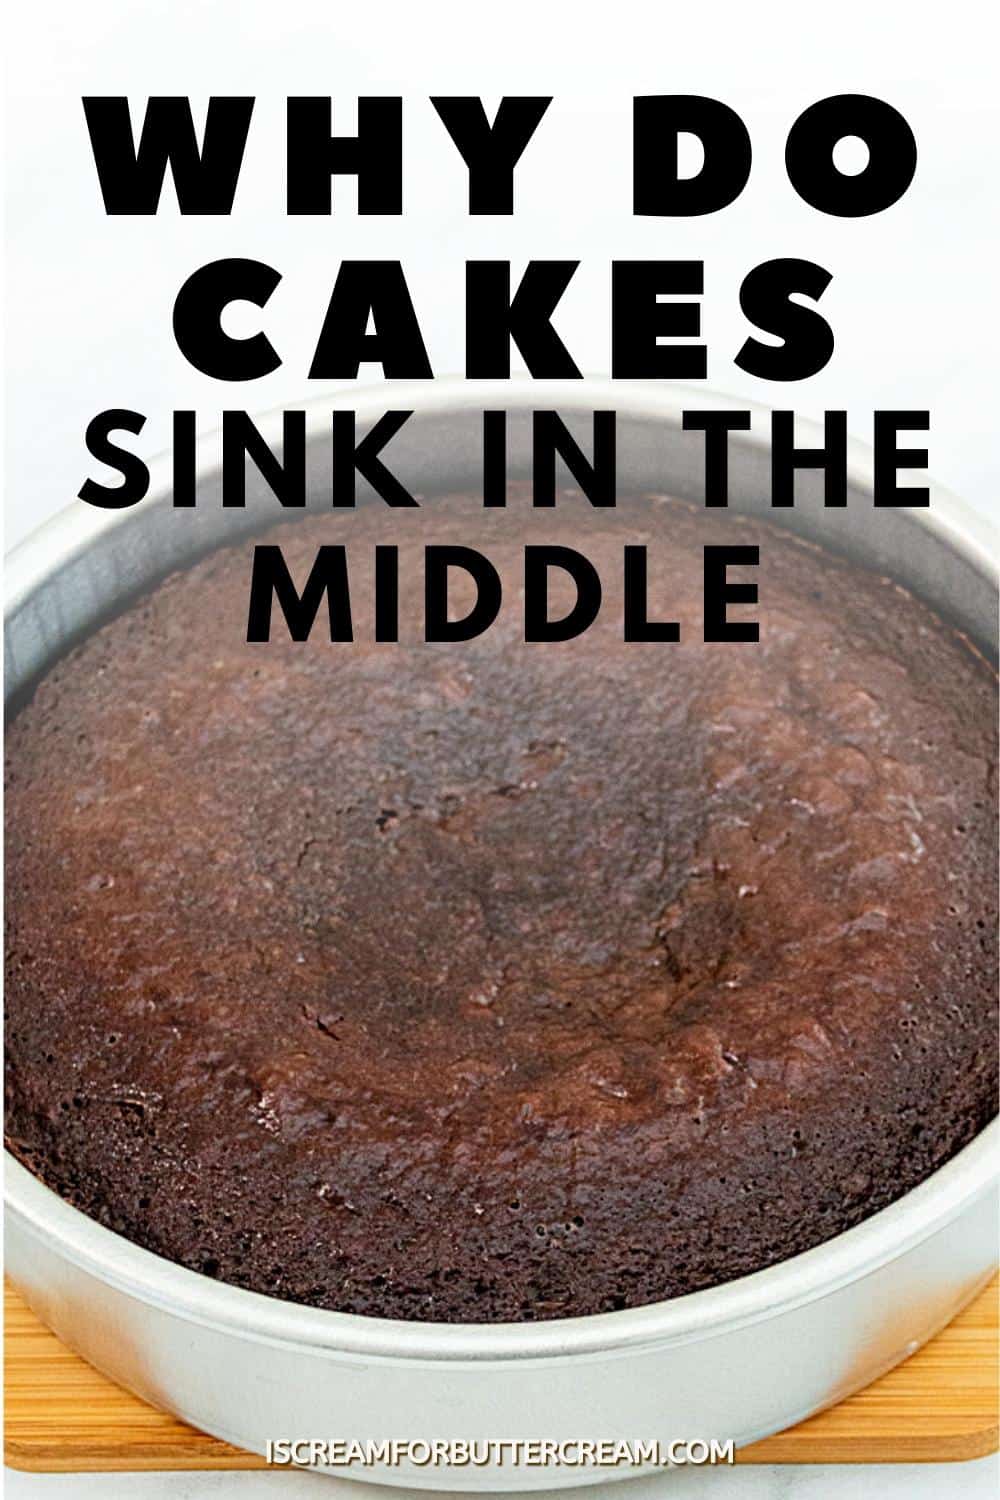 Cake layer in a pan with text overlay.